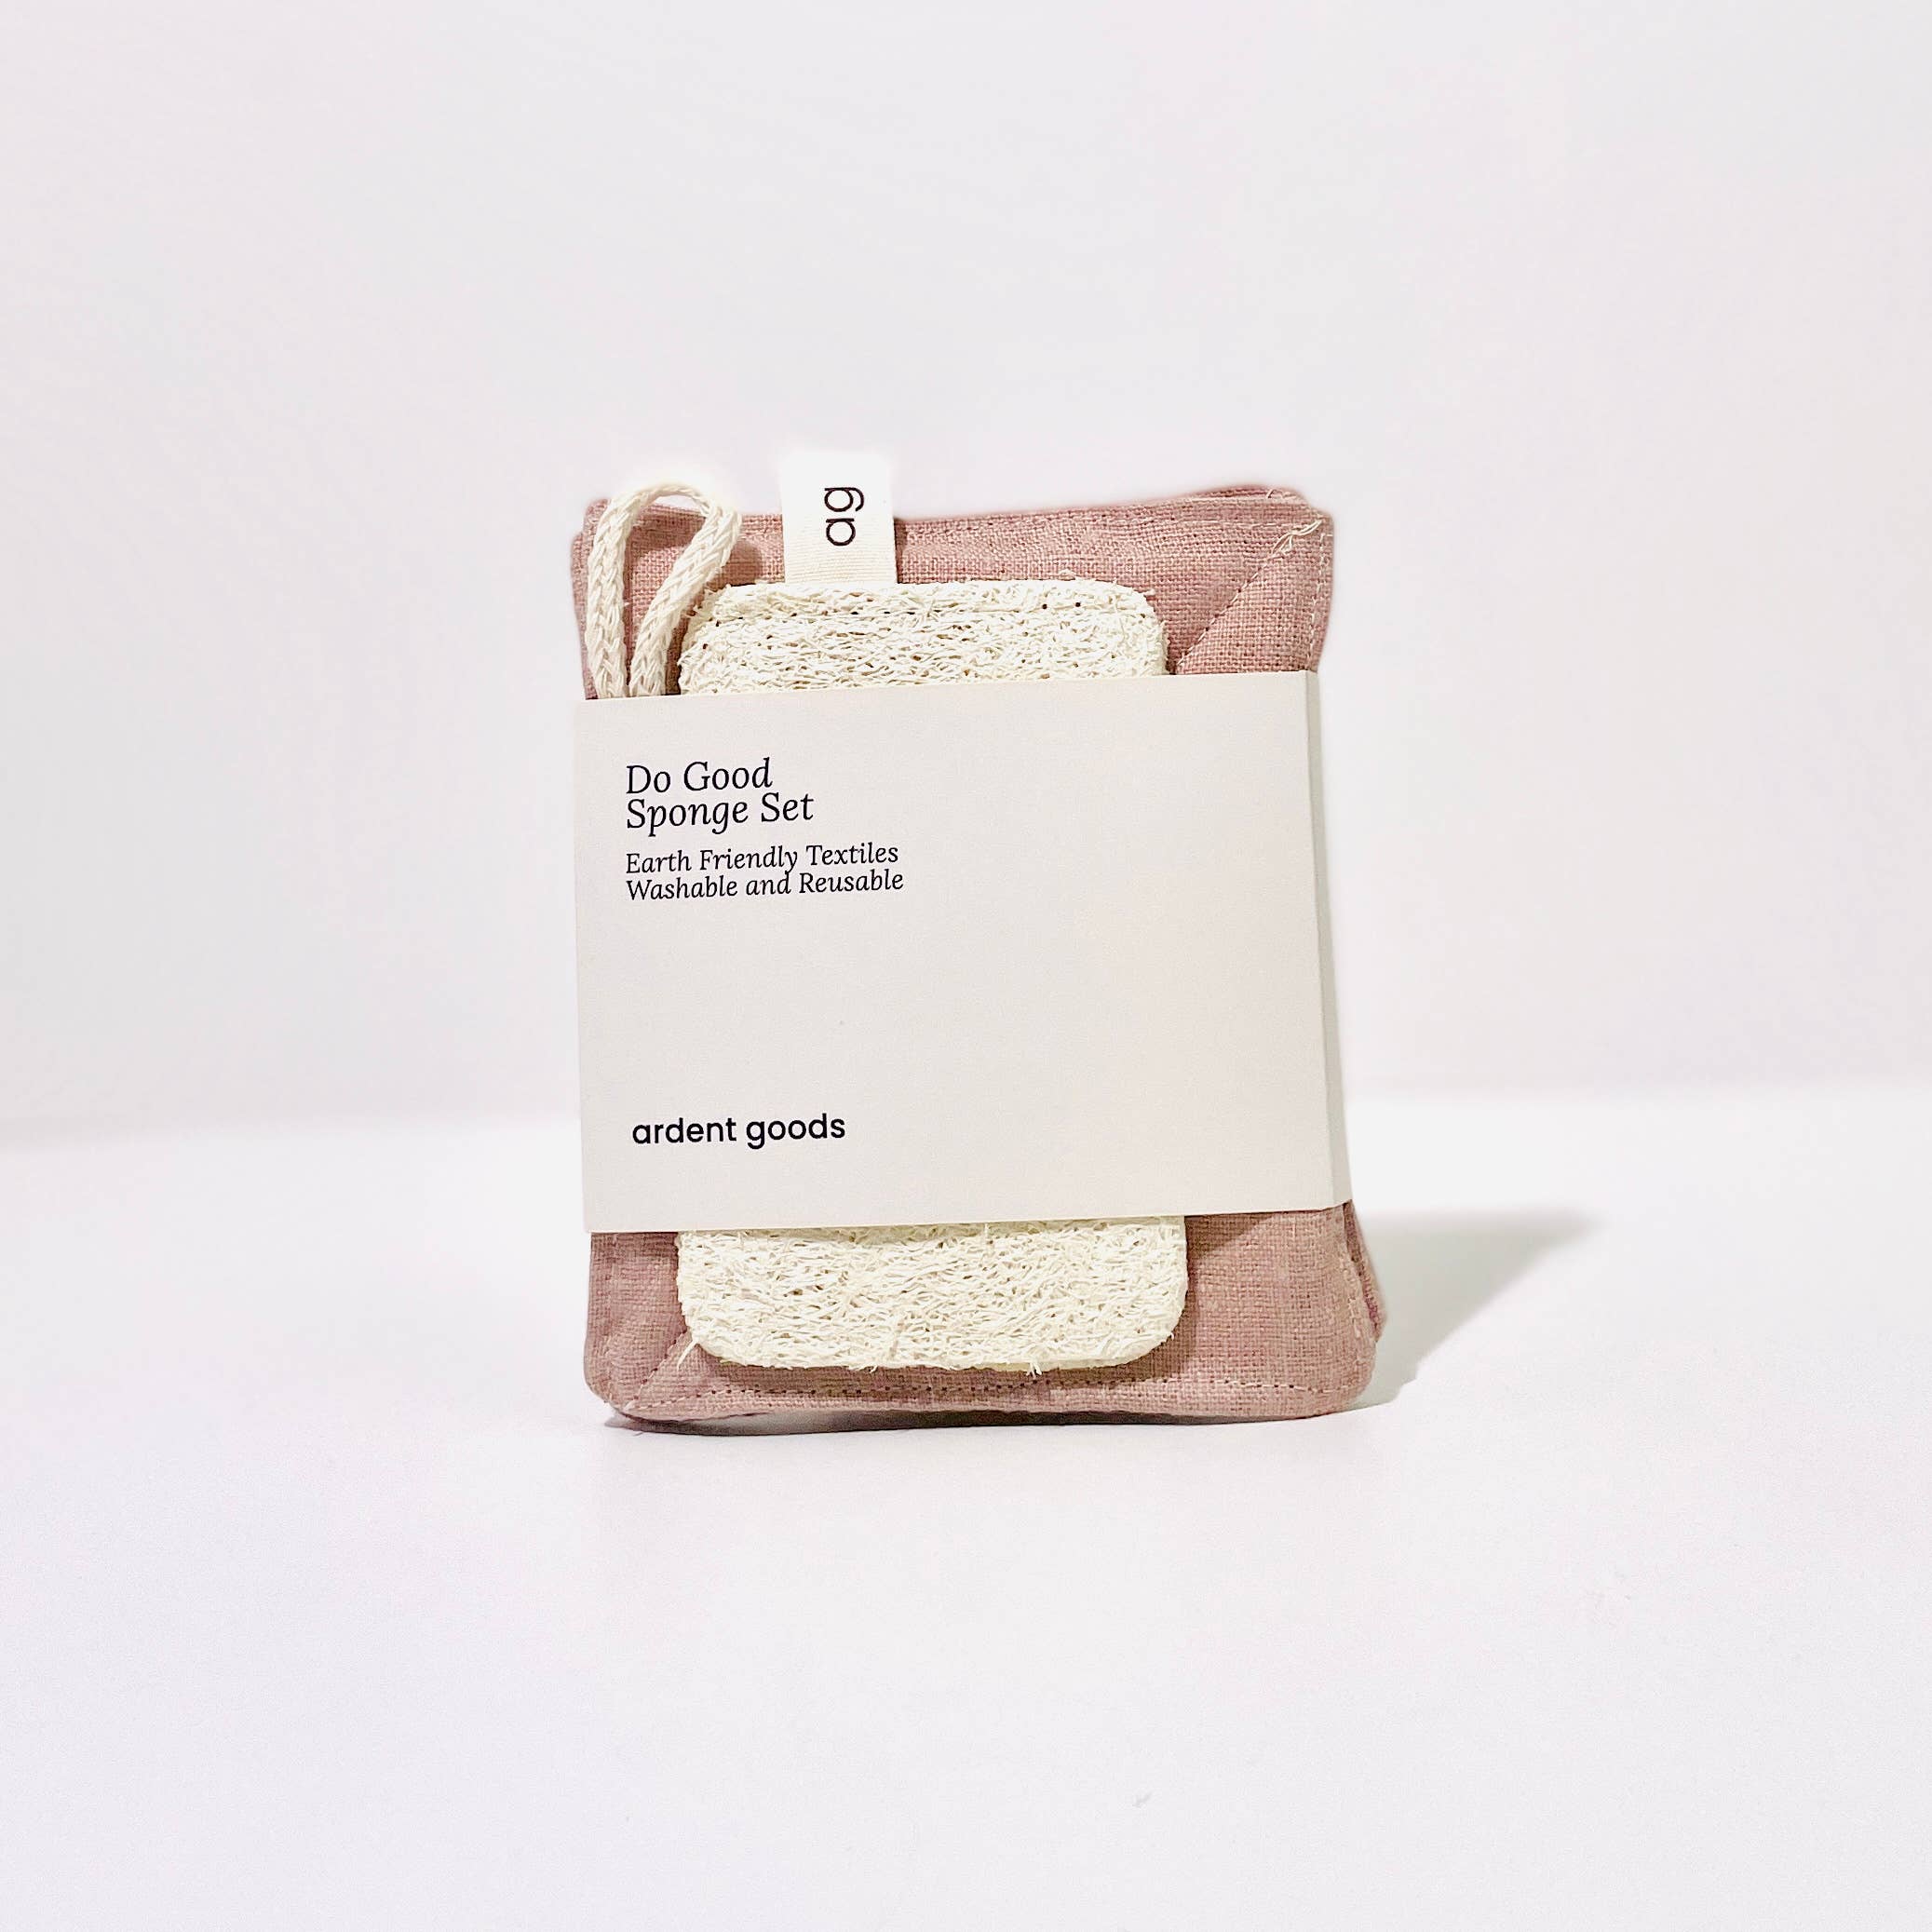 Accessories: Natural Sponges from Anthropologie - Remodelista